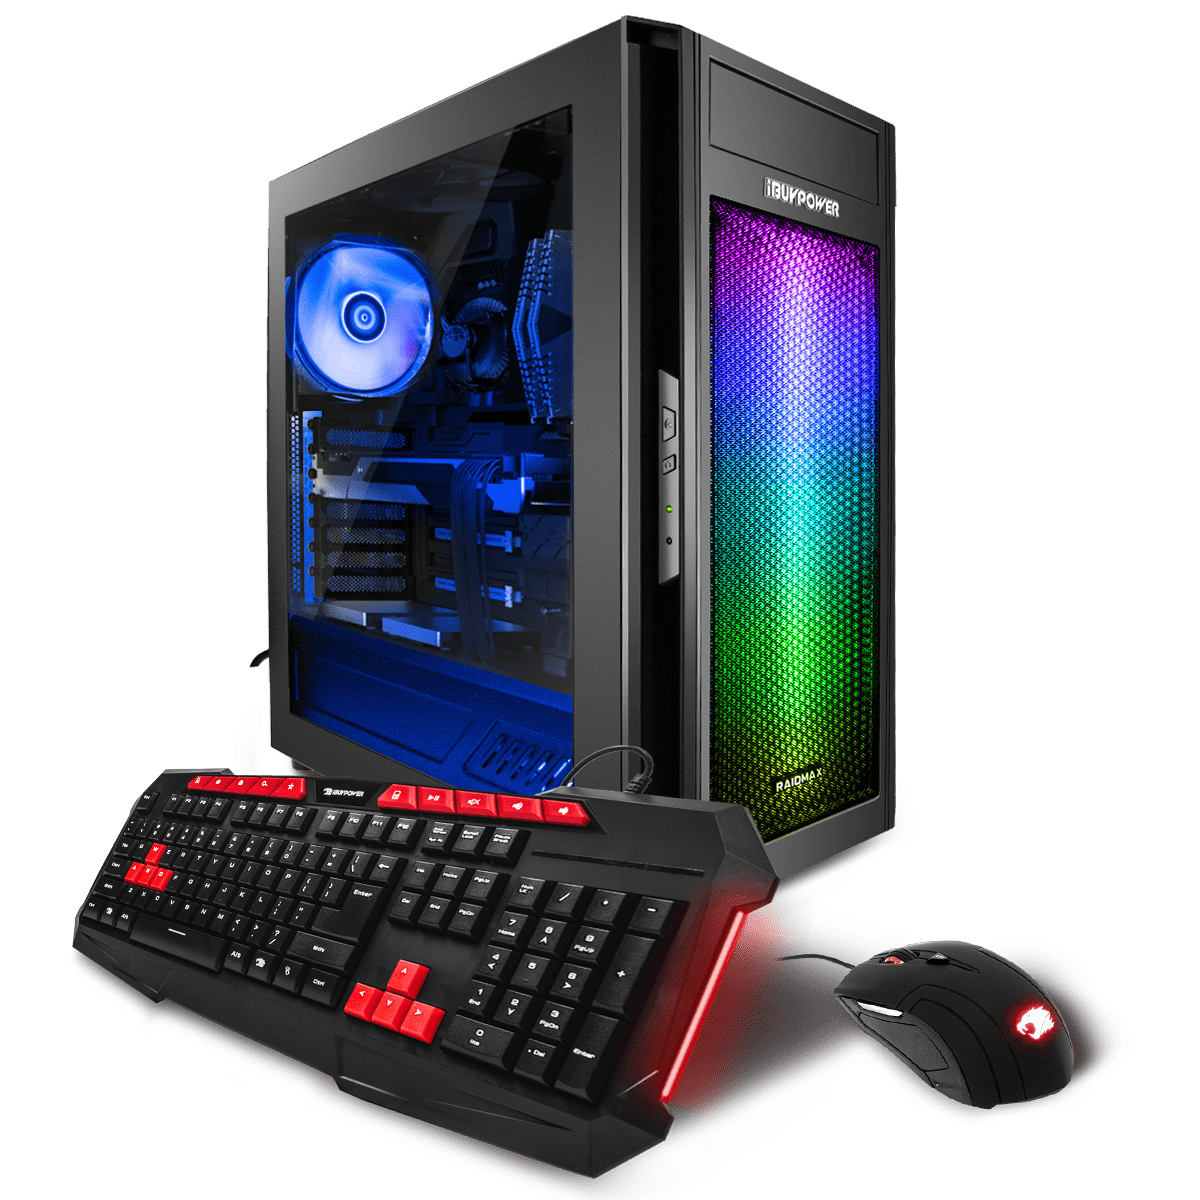 Costume Are Ibuypower Gaming Pcs Good for Streamer